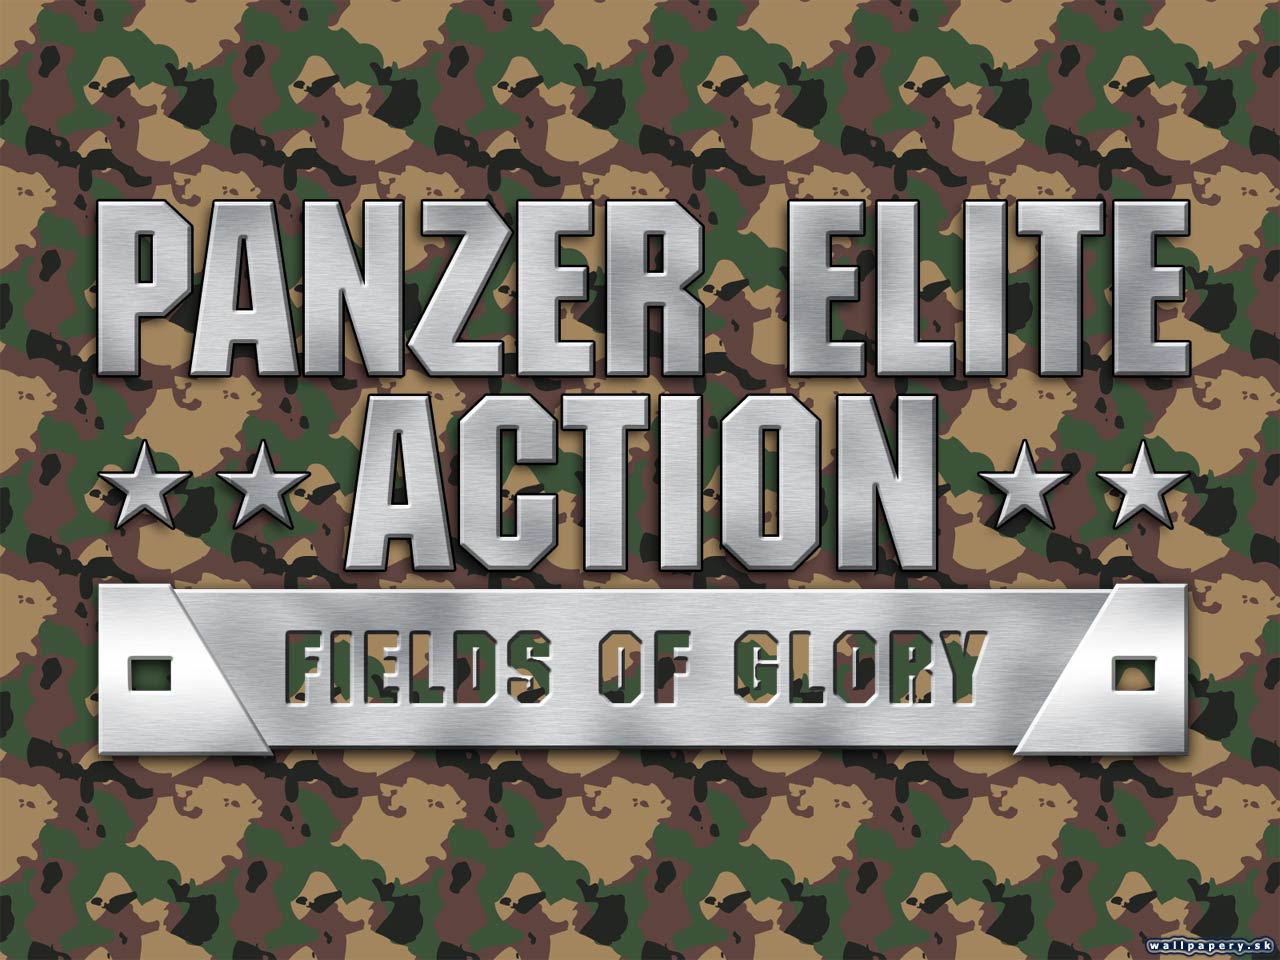 Panzer Elite Action: Fields of Glory - wallpaper 7